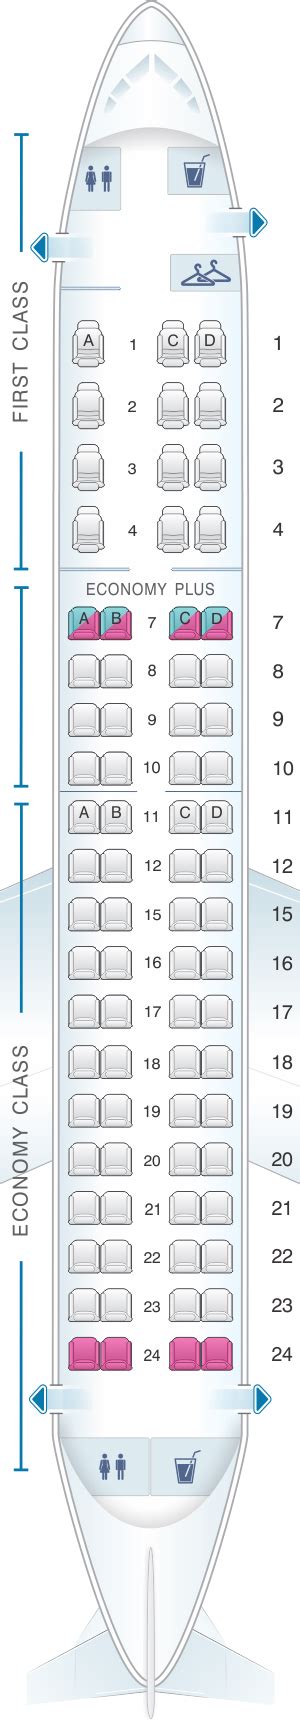 united airlines embraer 175 seat map